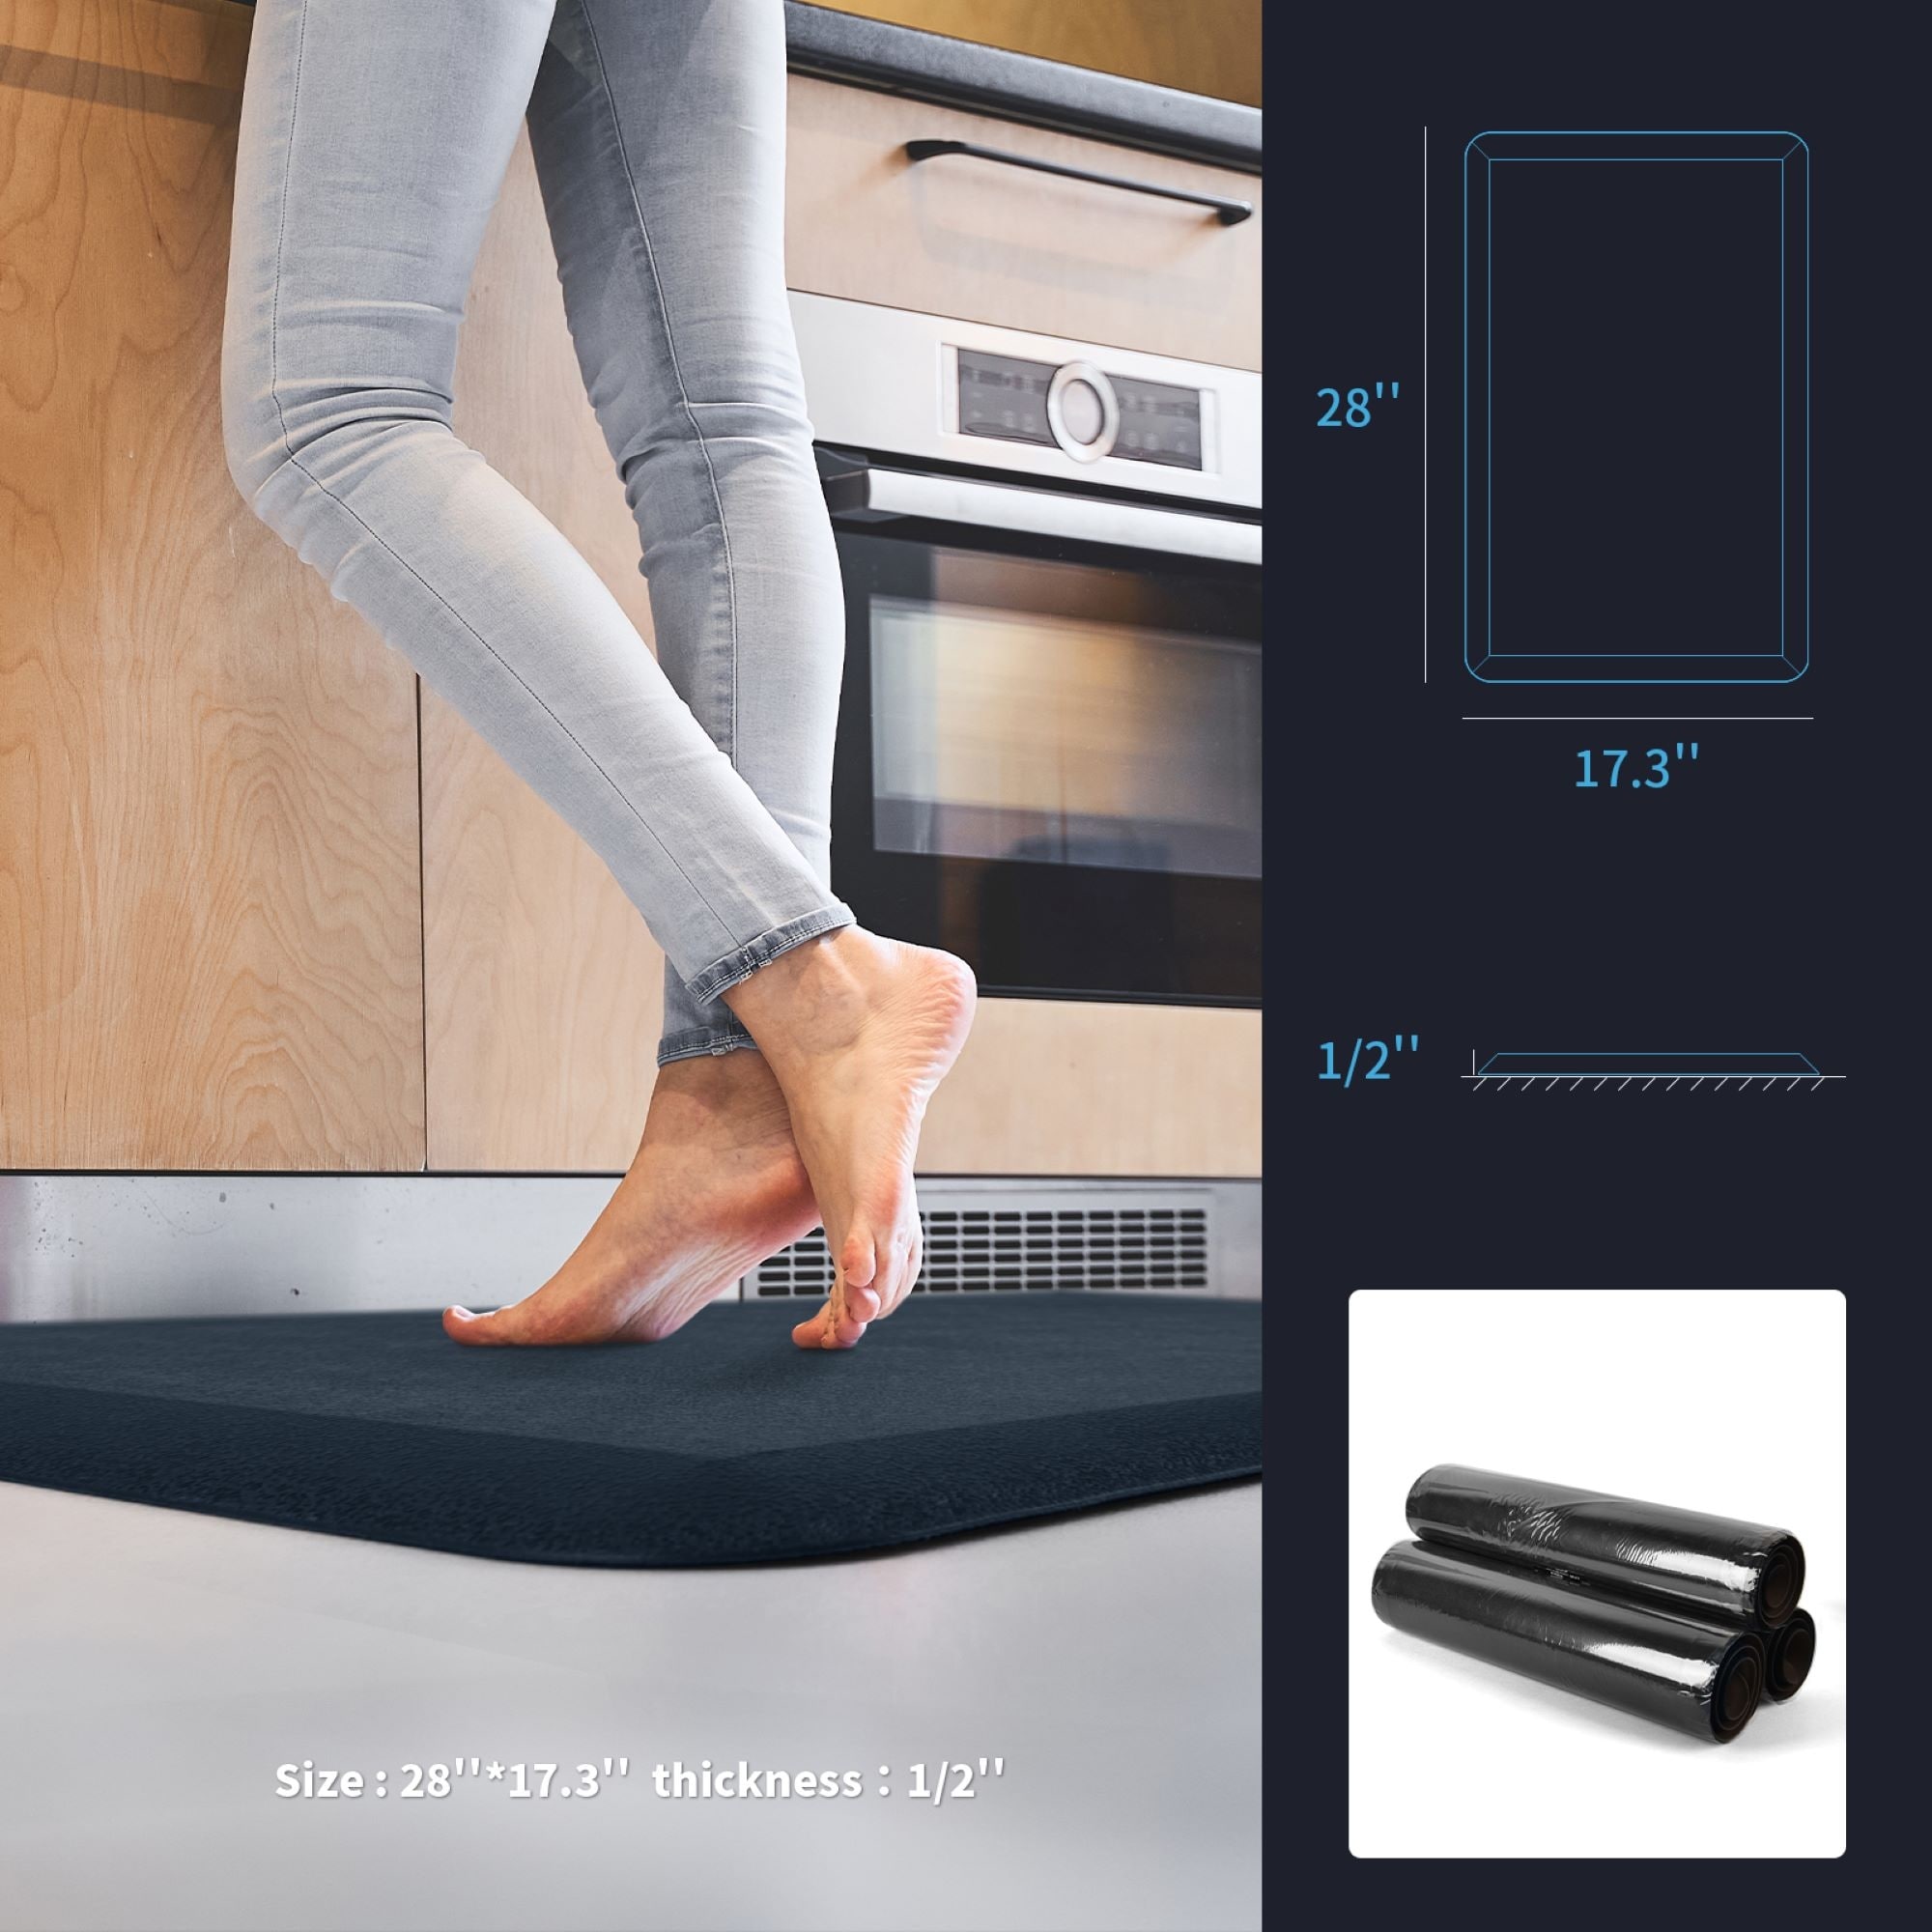 https://ak1.ostkcdn.com/images/products/is/images/direct/7a9bff9d46b98743ec7f9caa55db7cdbd7891c92/Premium-Anti-Fatigue-Comfort-Mat%2C-Thick%2C-Non-Slip-%26-All-Purpose-Comfort---for-Kitchen%2C-Office-Standing-Desk.jpg